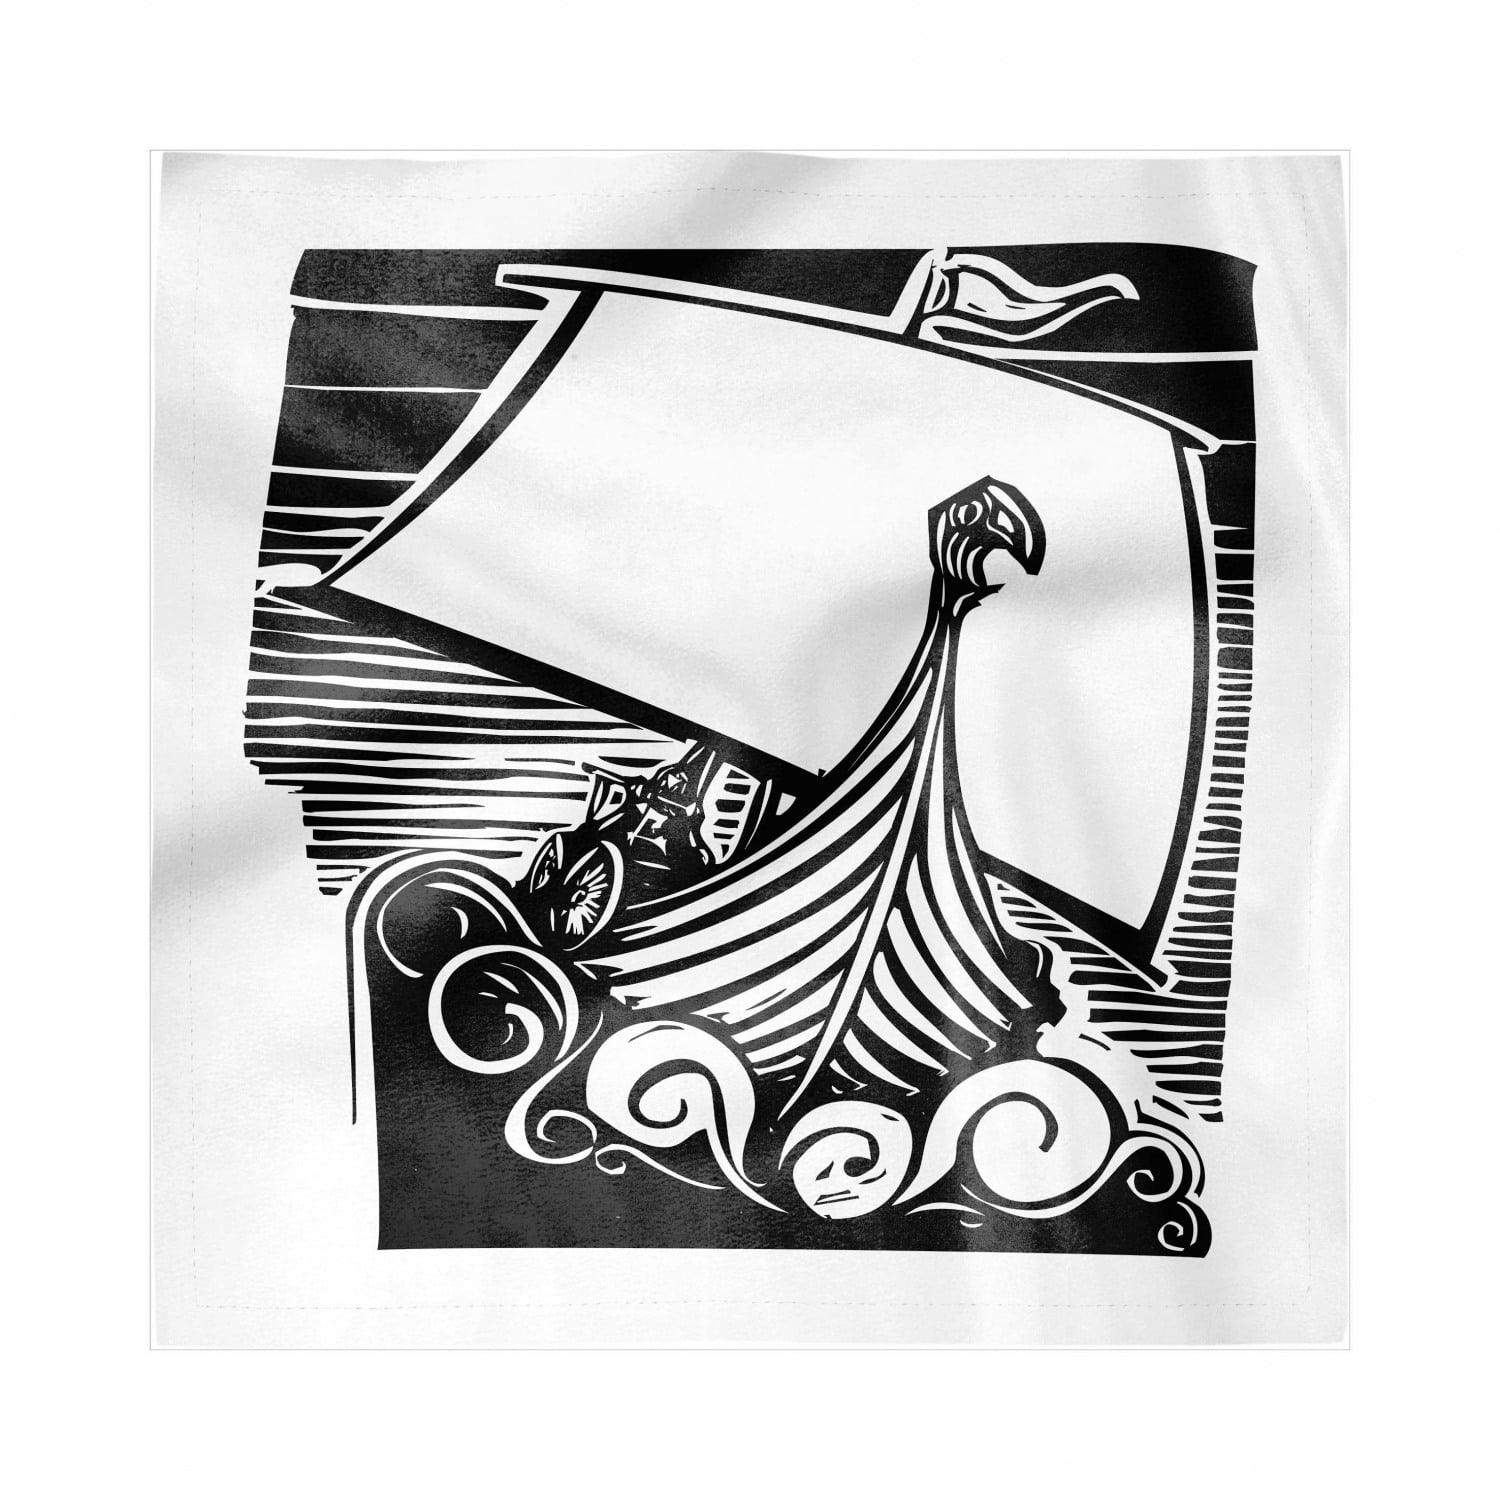 Ambesonne Nordic Tablecloth 60 X 90 Black and White Rectangular Table Cover for Dining Room Kitchen Decor Viking Longship Sailing on Swirling Waves Stormy Ocean Exploration Theme Art